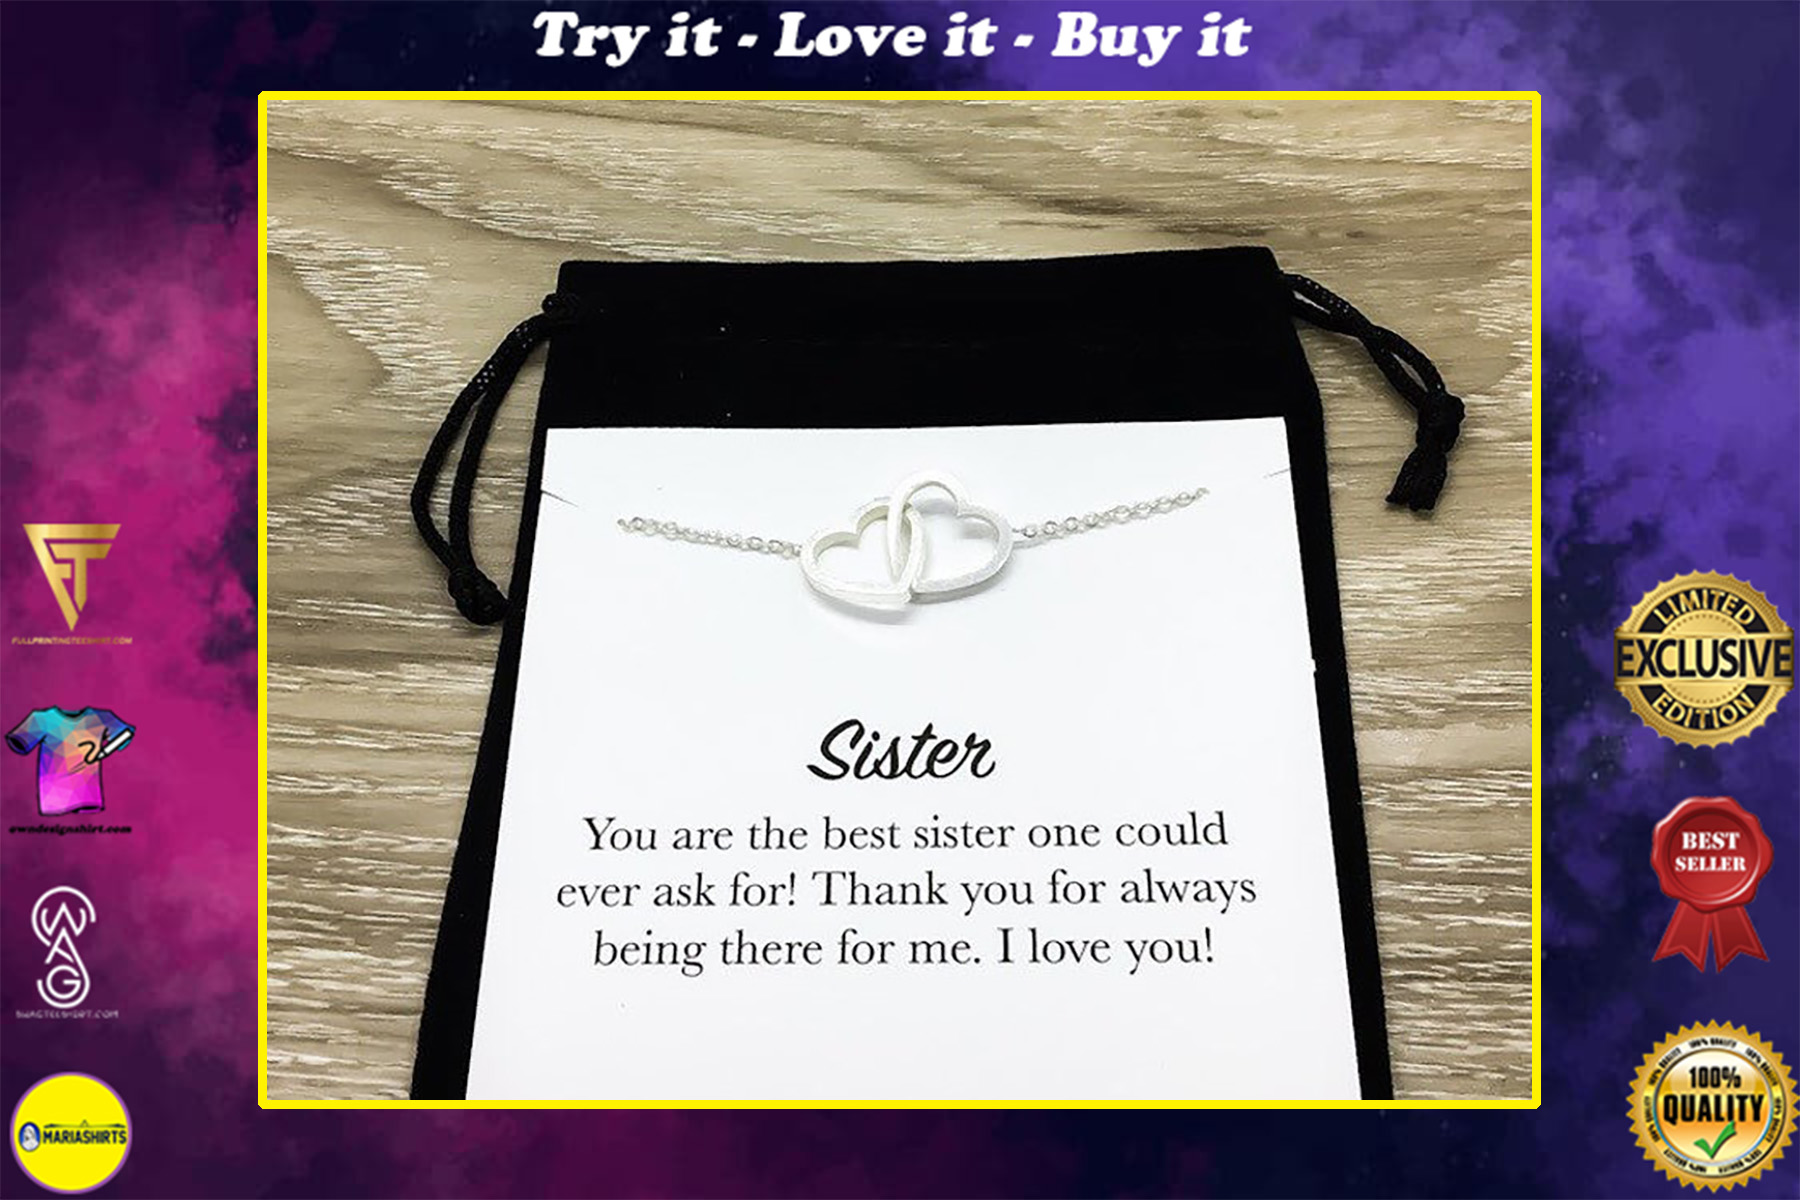 sister thank you for always being there for me i love you hearts necklace